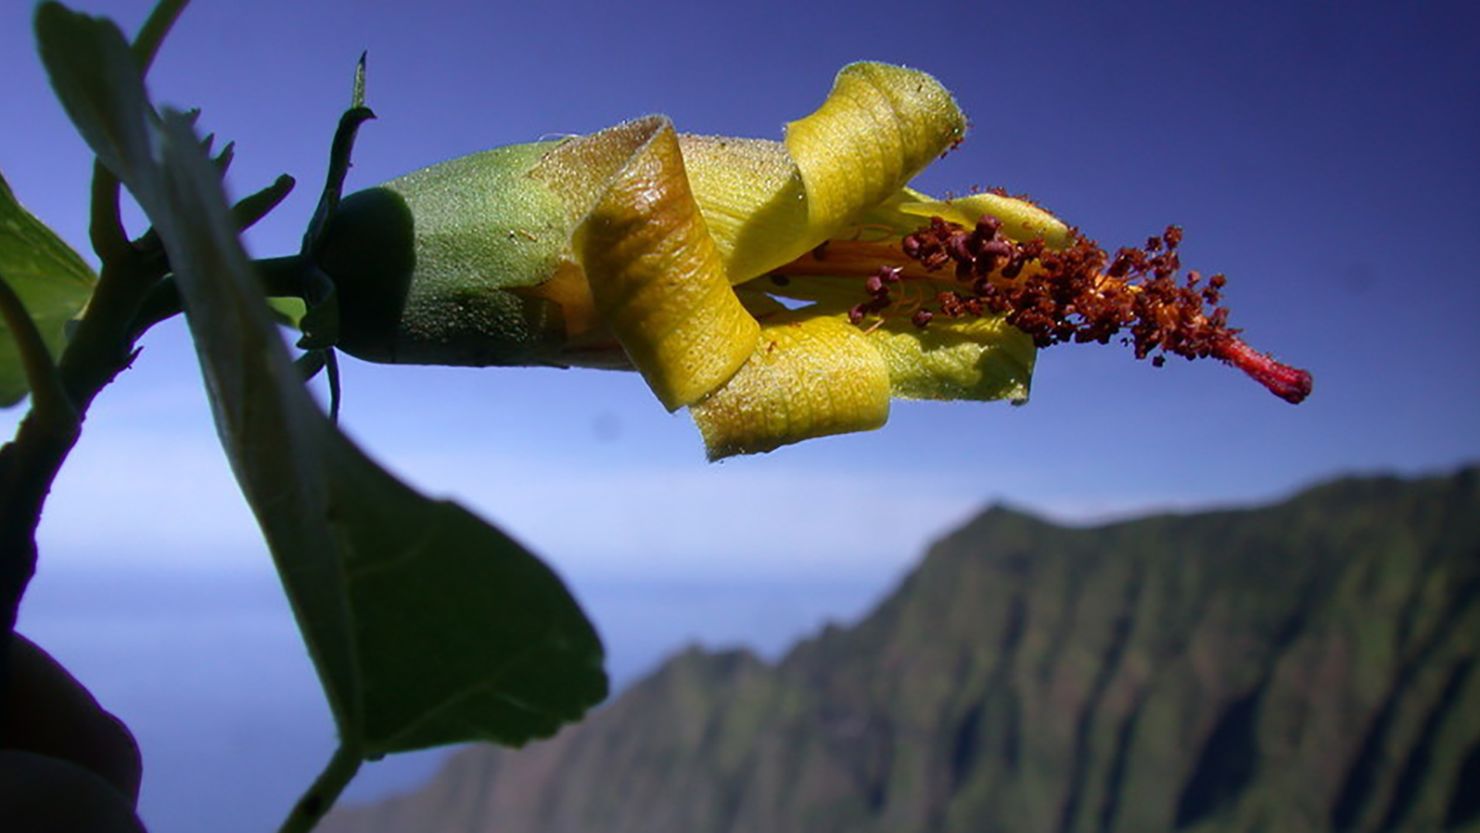 Thought to be extinct, the Hibiscadelphus woodii was rediscovered on a cliff face by a drone. 